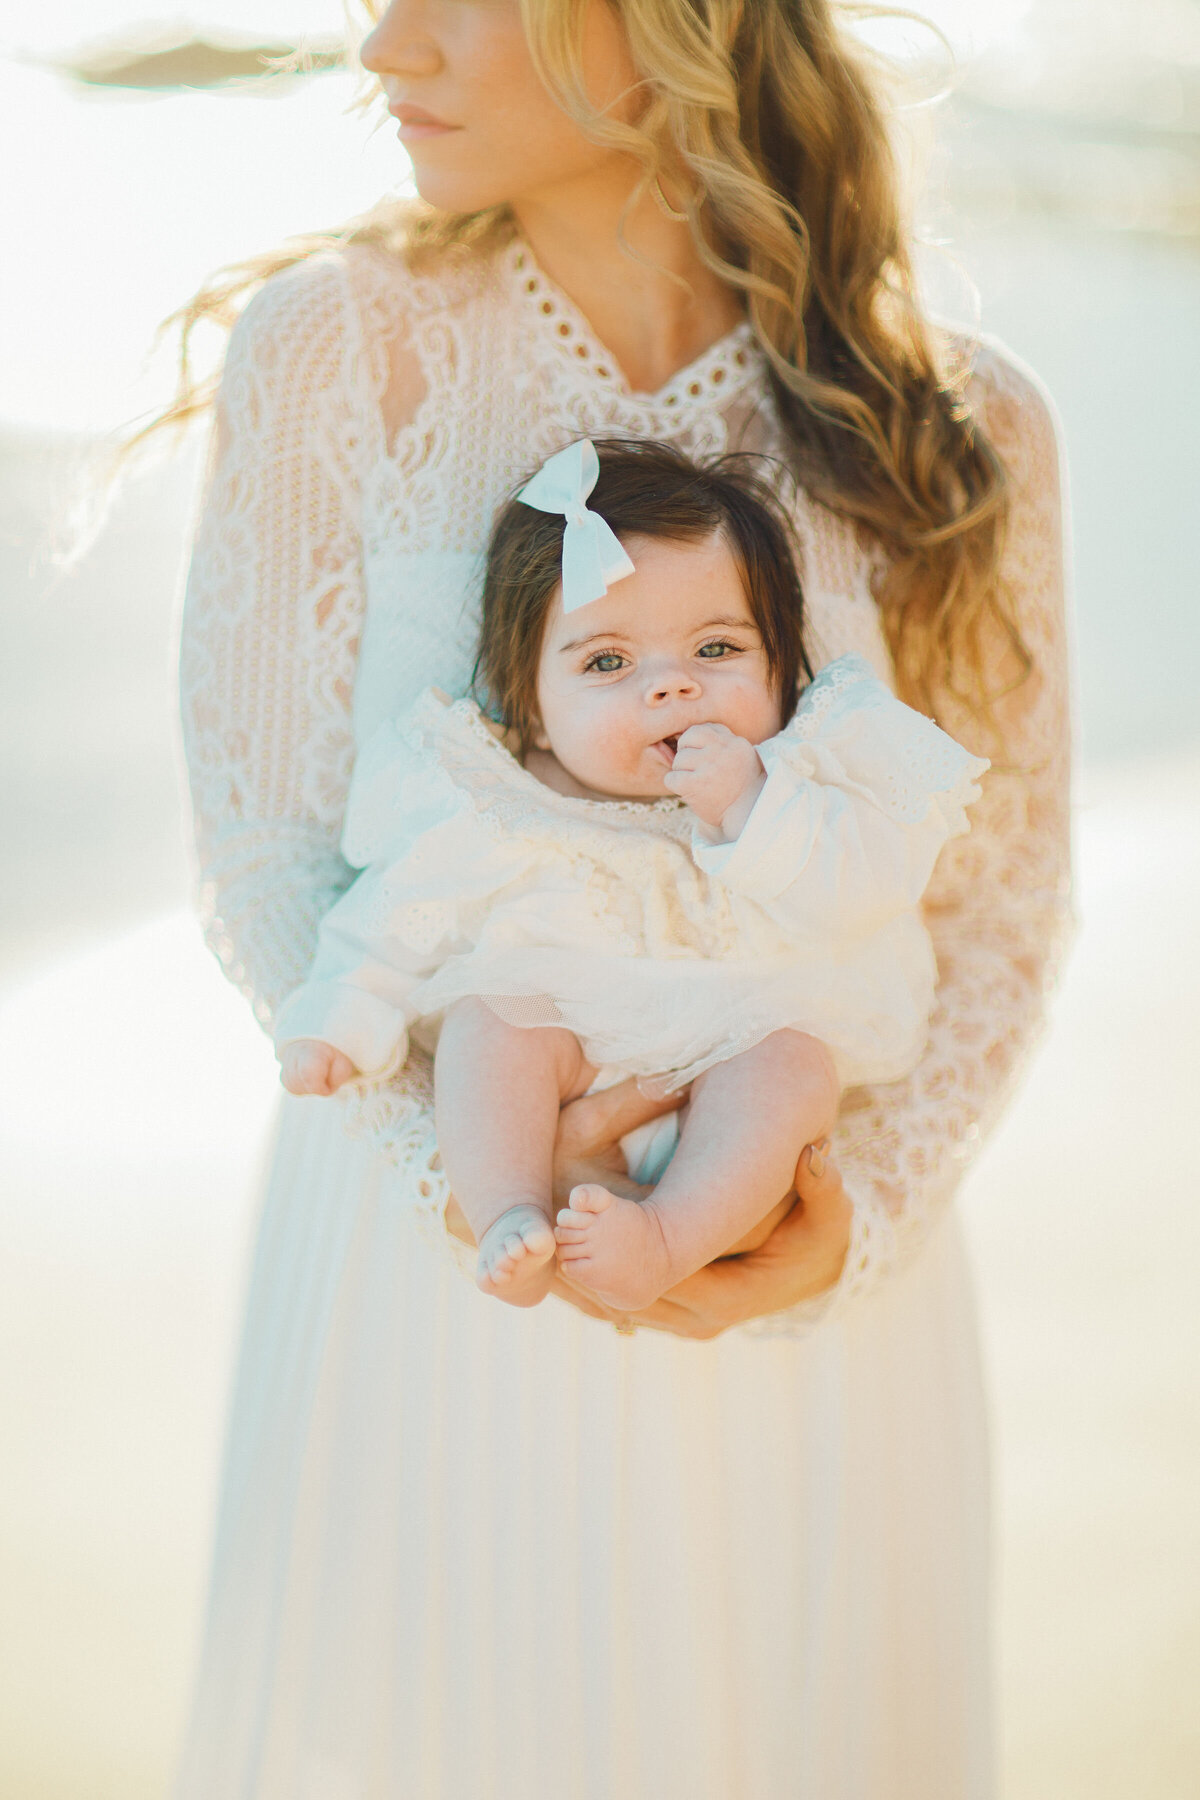 Family Portrait Photo Of Mother In White Dress Carrying Her Baby Los Angeles